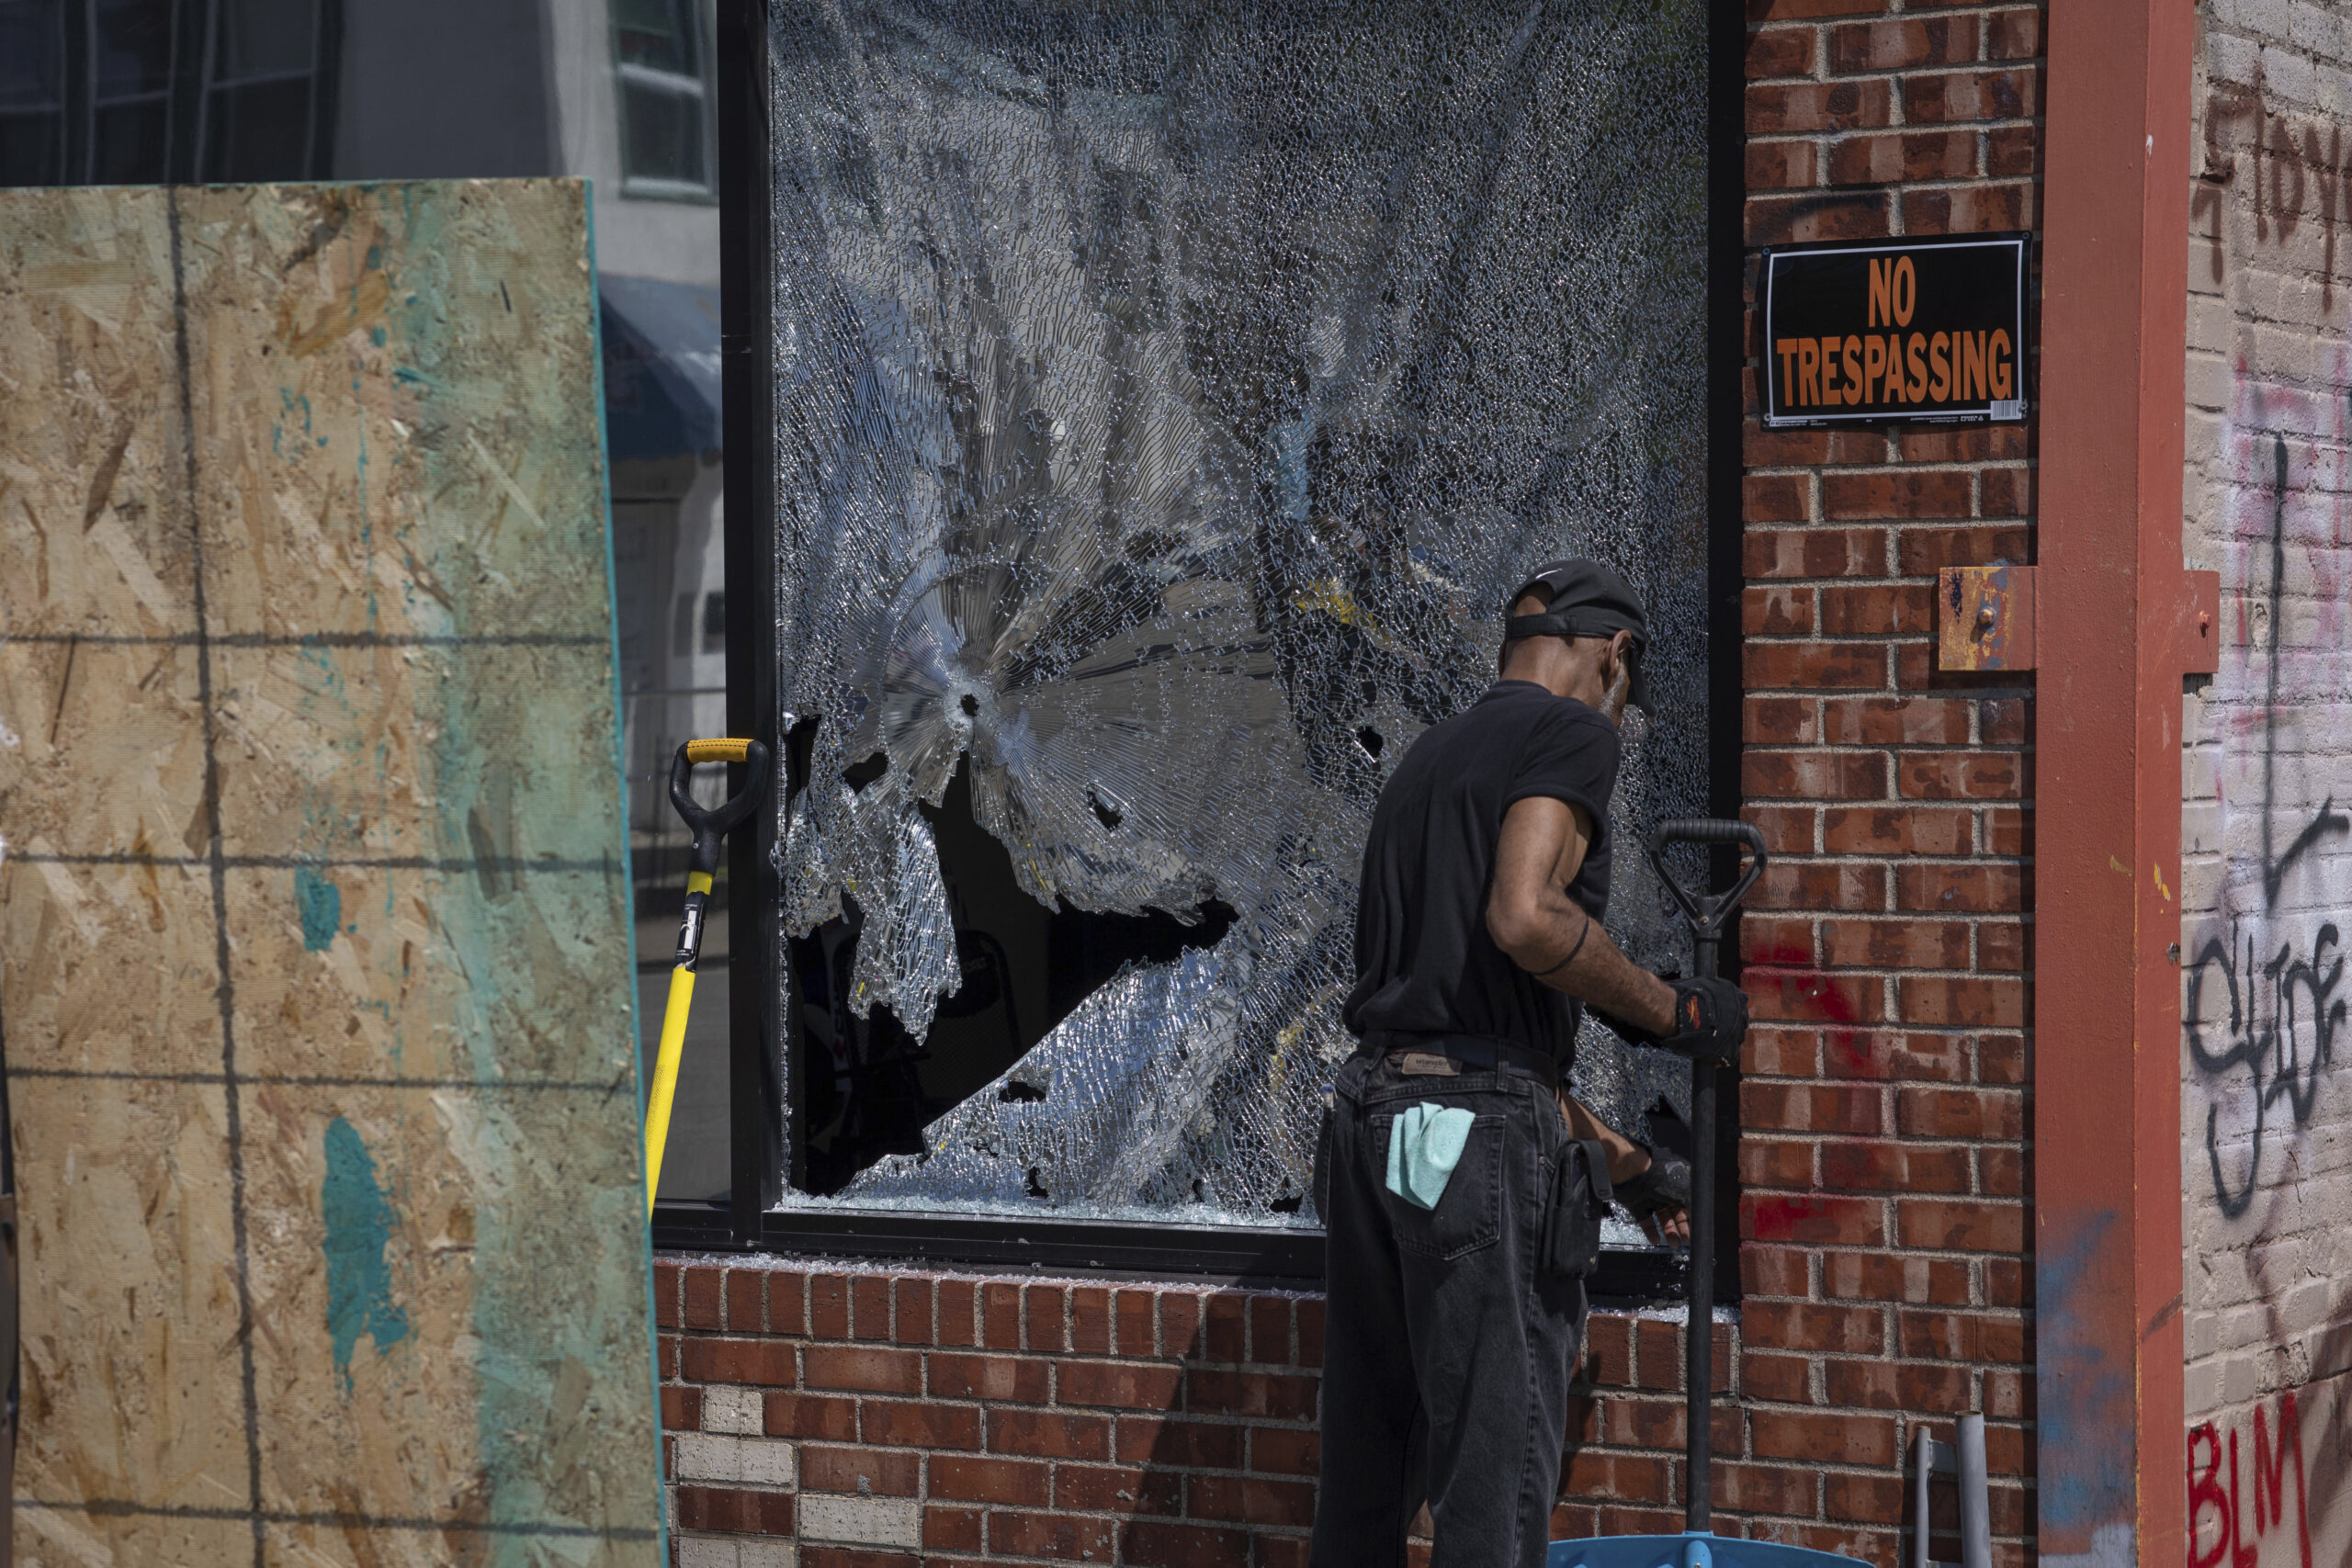 A man cleans up a broken window to a barber shop after shots were fired in George Floyd Square on the one year anniversary of George Floyd's death on Tuesday, May 25, 2021, in Minneapolis. The intersection where George Floyd died was disrupted by gunfire Tuesday, just hours before it was to be the site of a family-friendly street festival marking the anniversary of his death at the hands of police.(AP Photo/Christian Monterrosa)